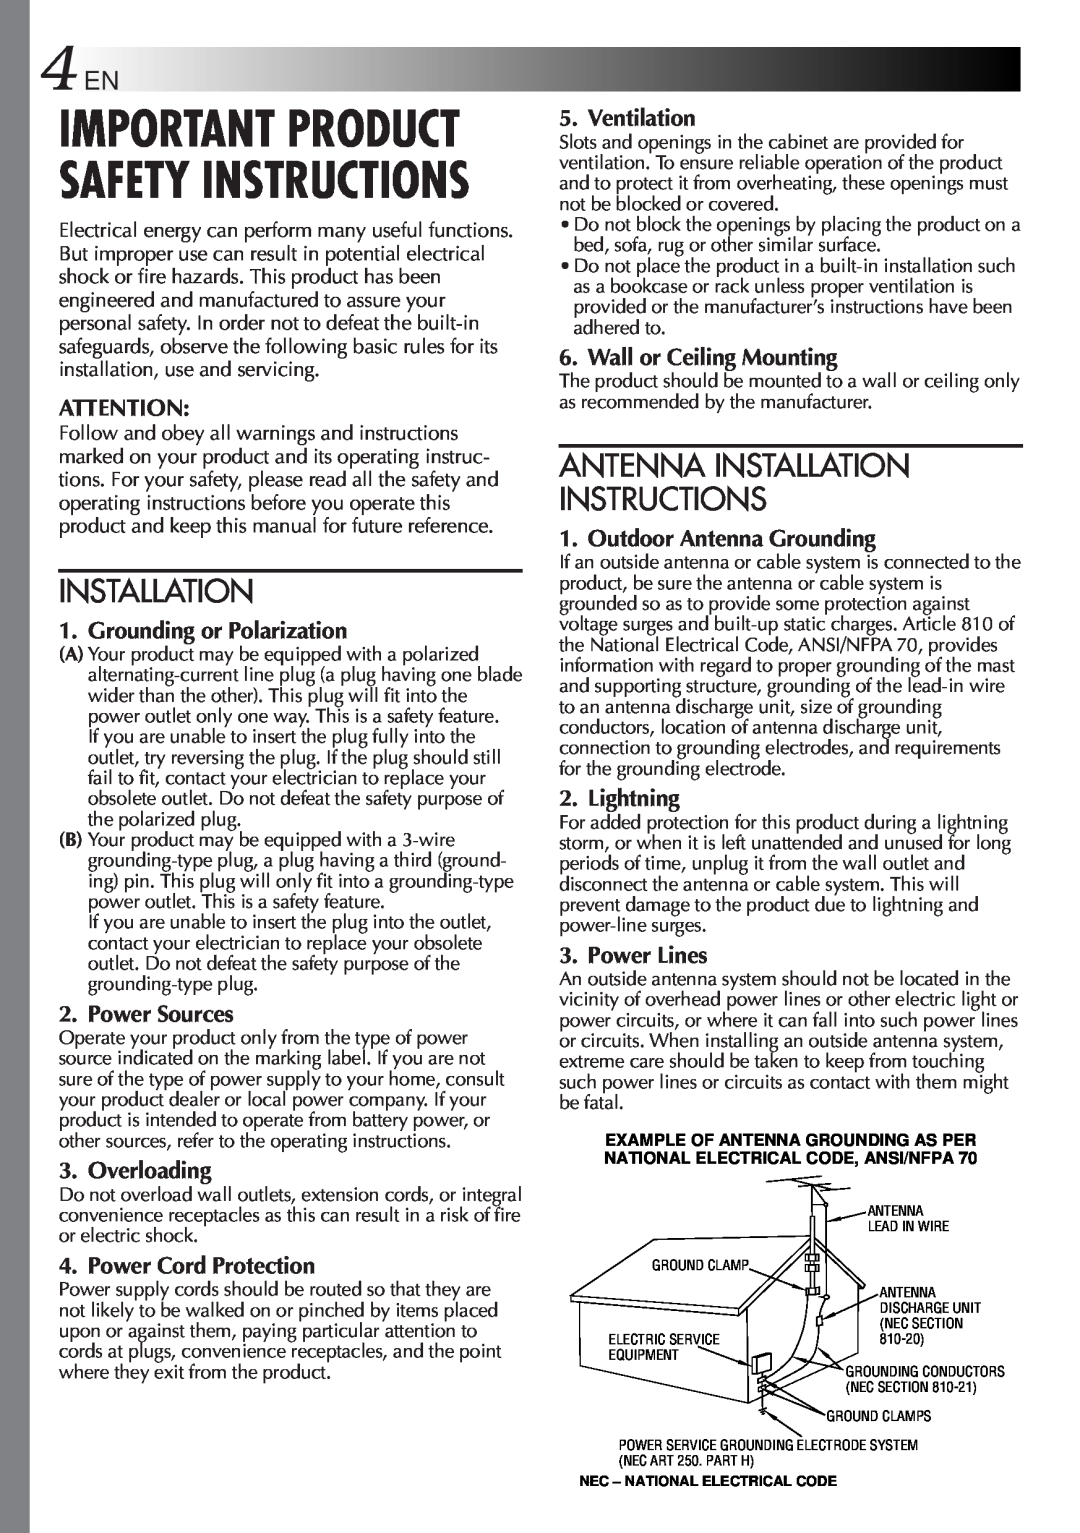 JVC GR-SXM321 Antenna Installation Instructions, Important Product Safety Instructions, Ventilation, Power Sources 